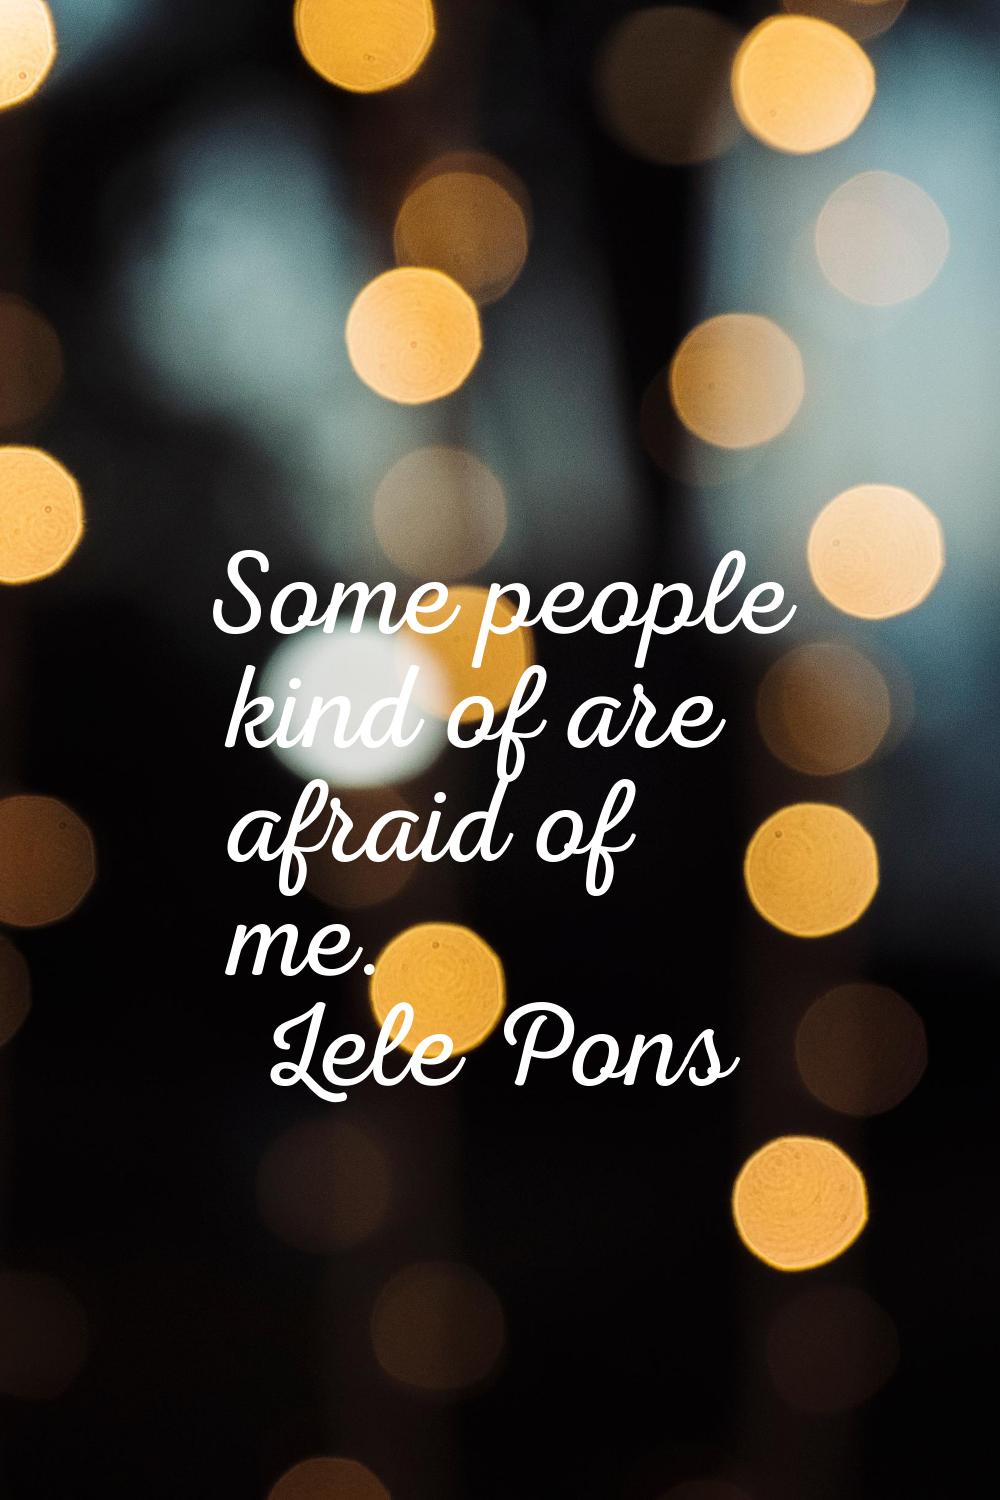 Some people kind of are afraid of me.